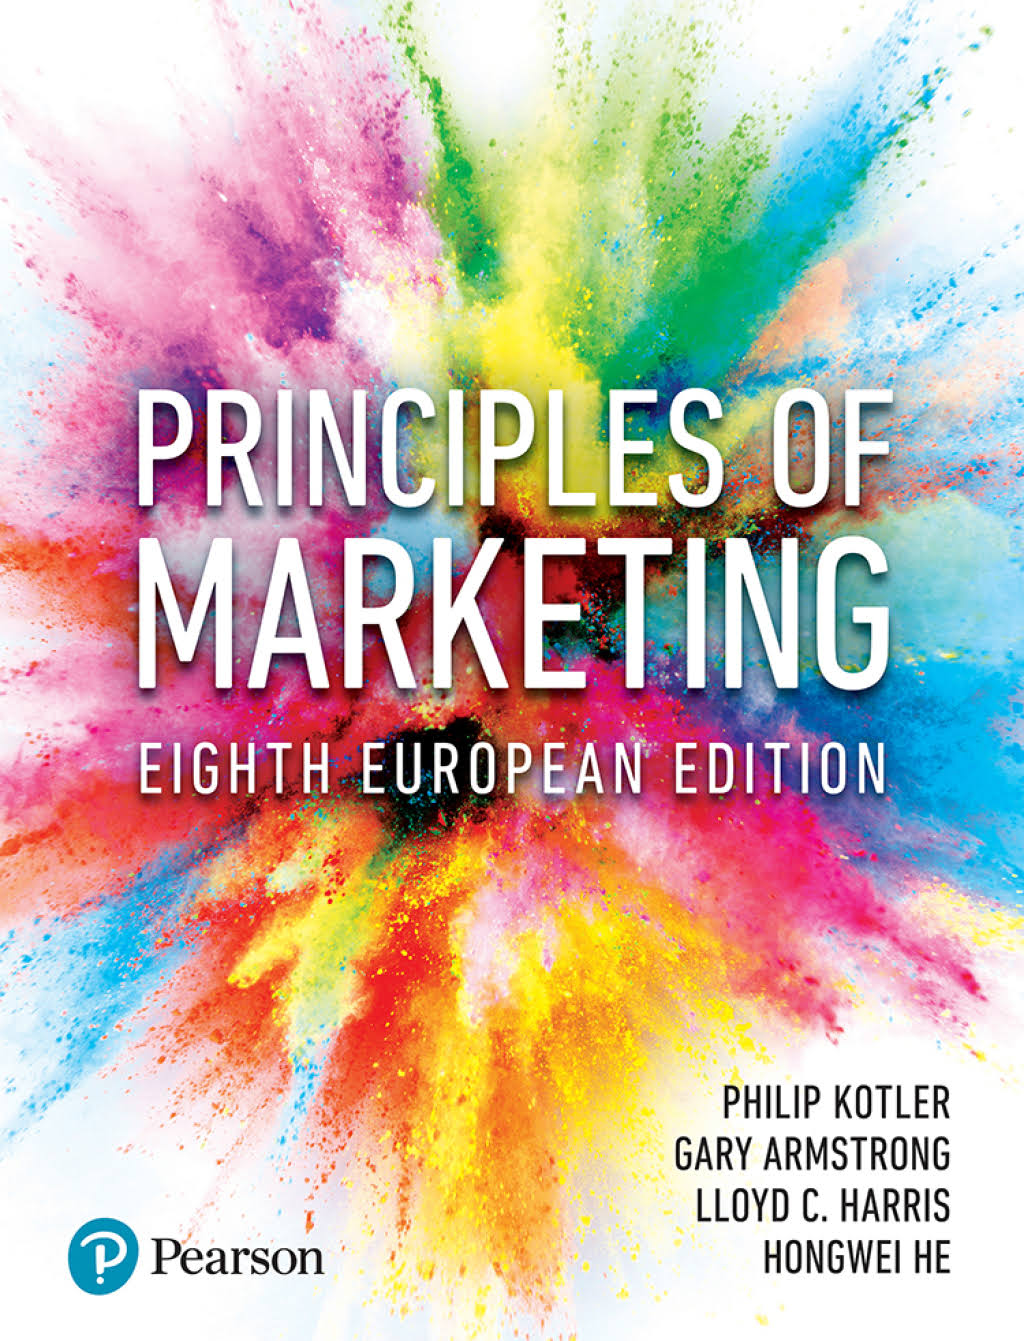 Principles of Marketing by Gary Armstrong